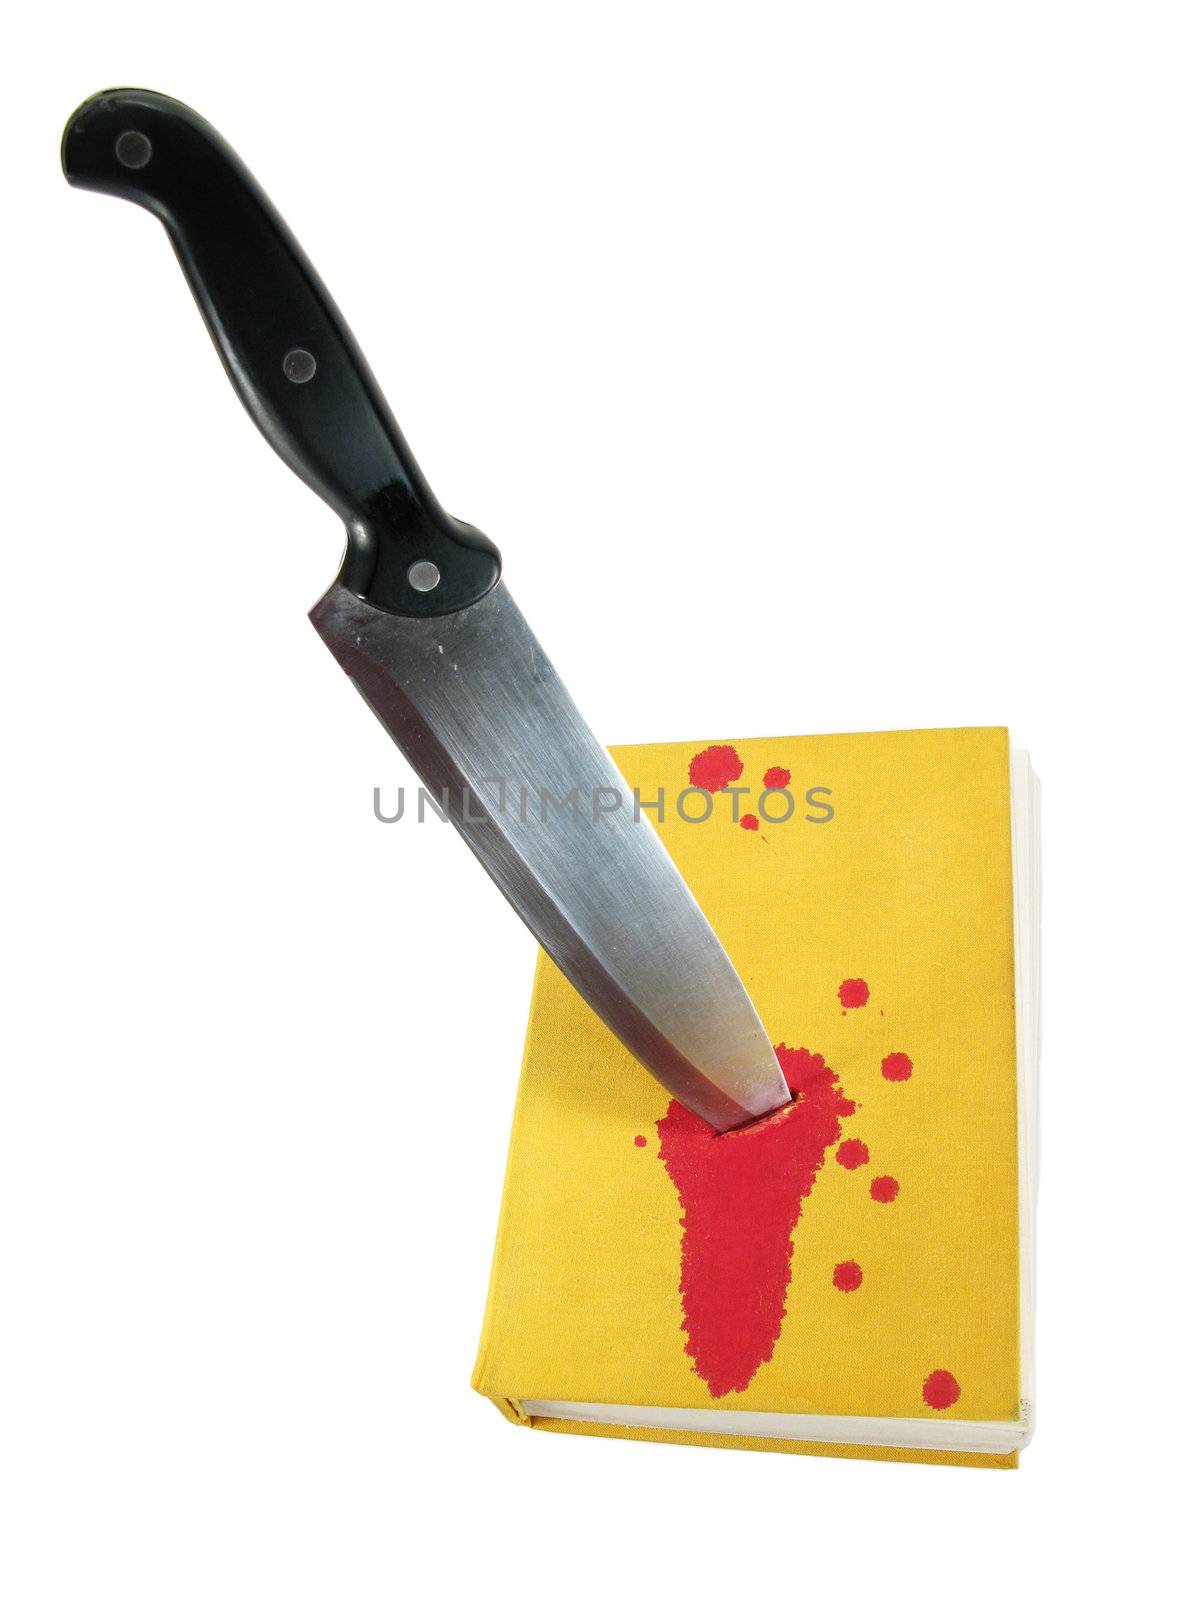 Metaphor: bloody book “killed” by knife. Isolated on white.